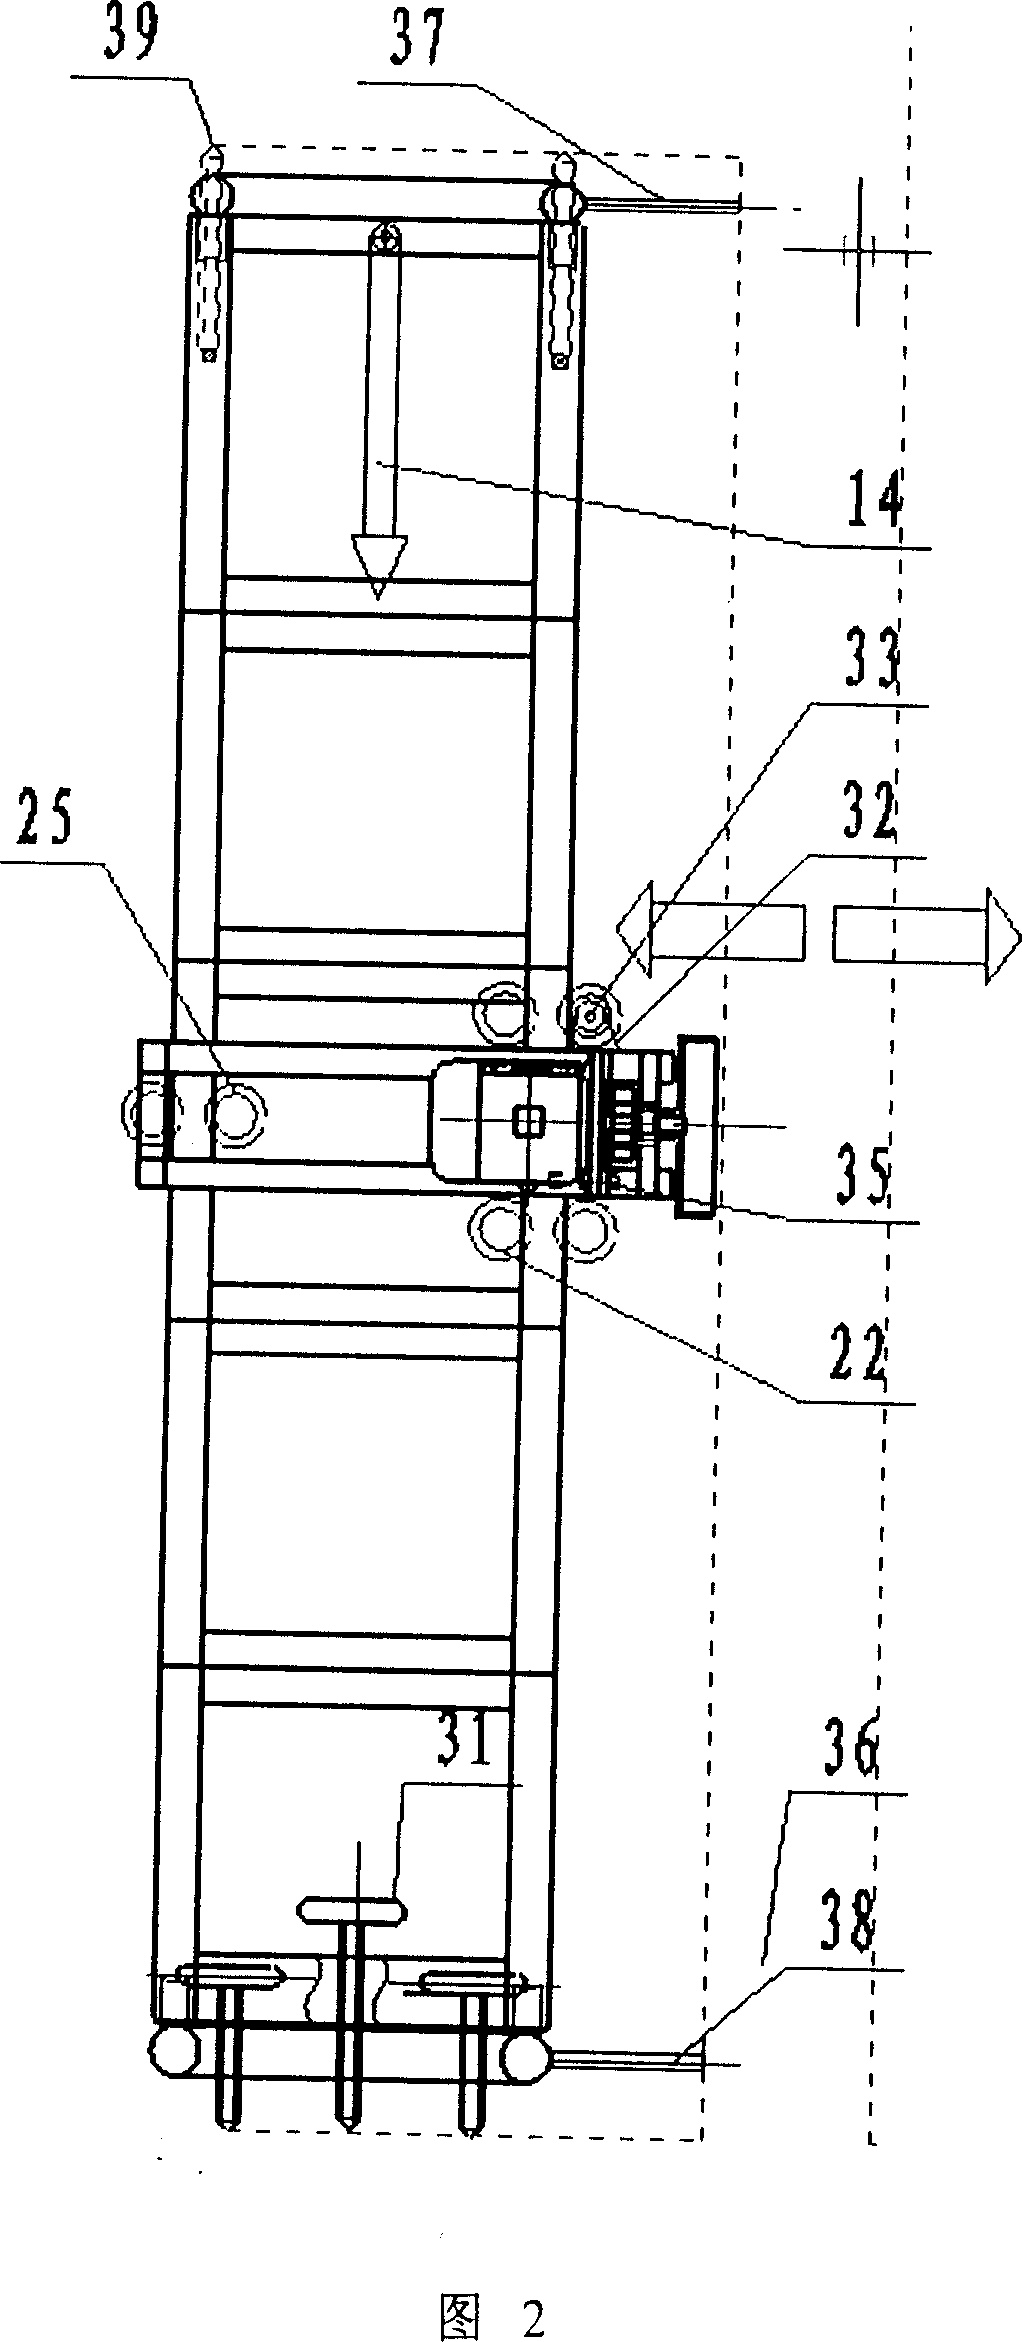 Machine tool for flattening wall space